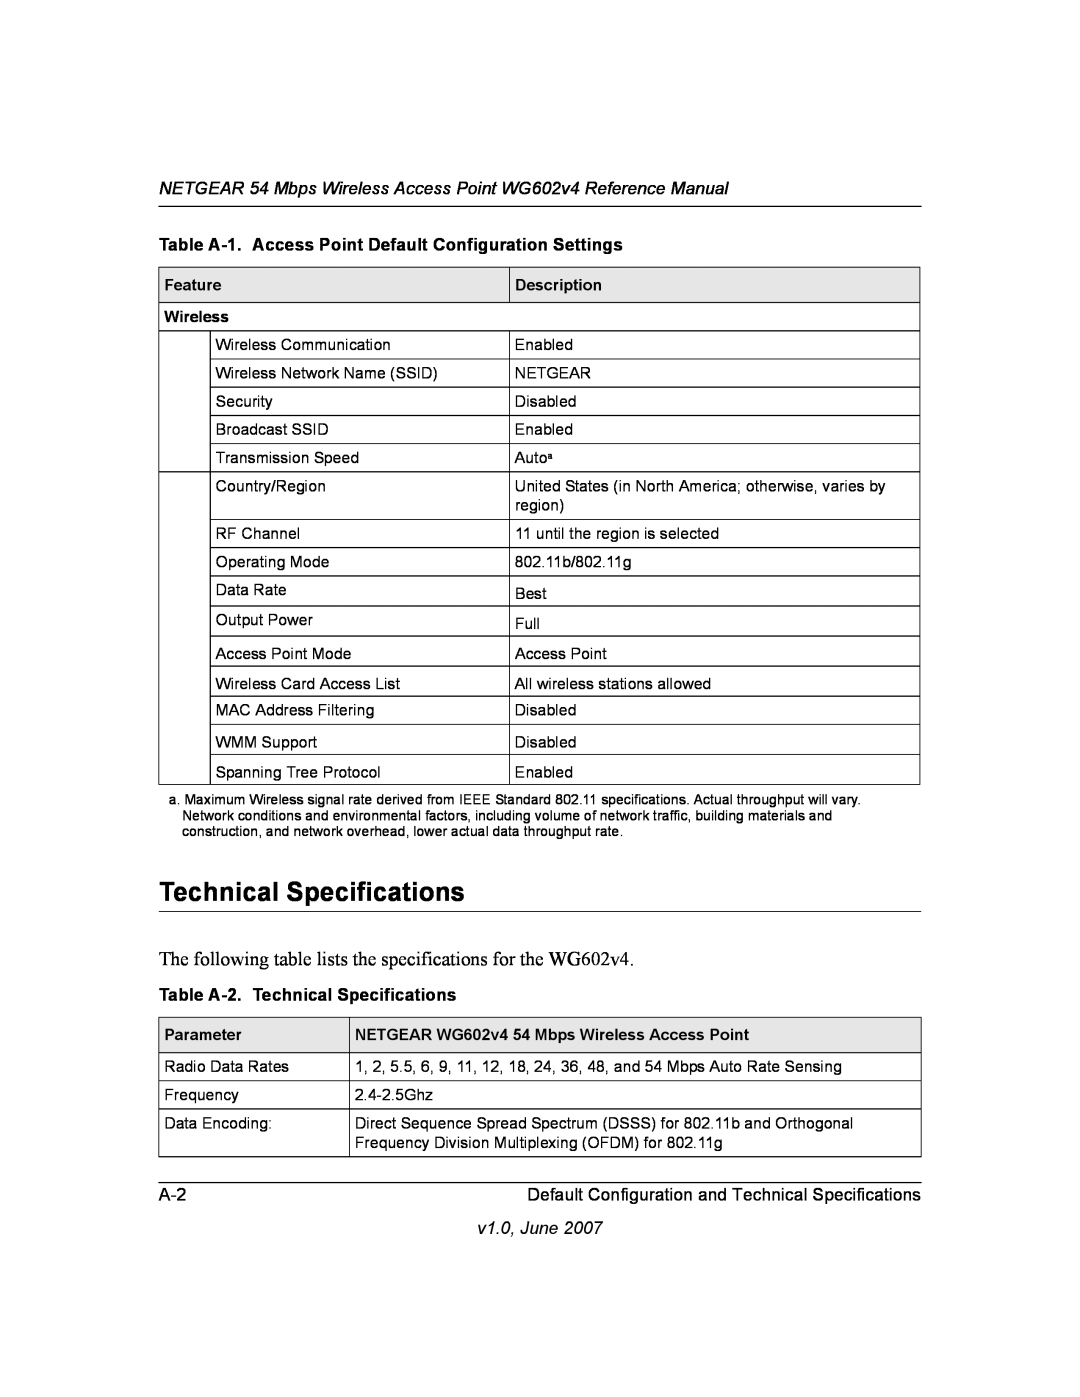 NETGEAR WG602V4 manual Technical Specifications, The following table lists the specifications for the WG602v4, v1.0, June 